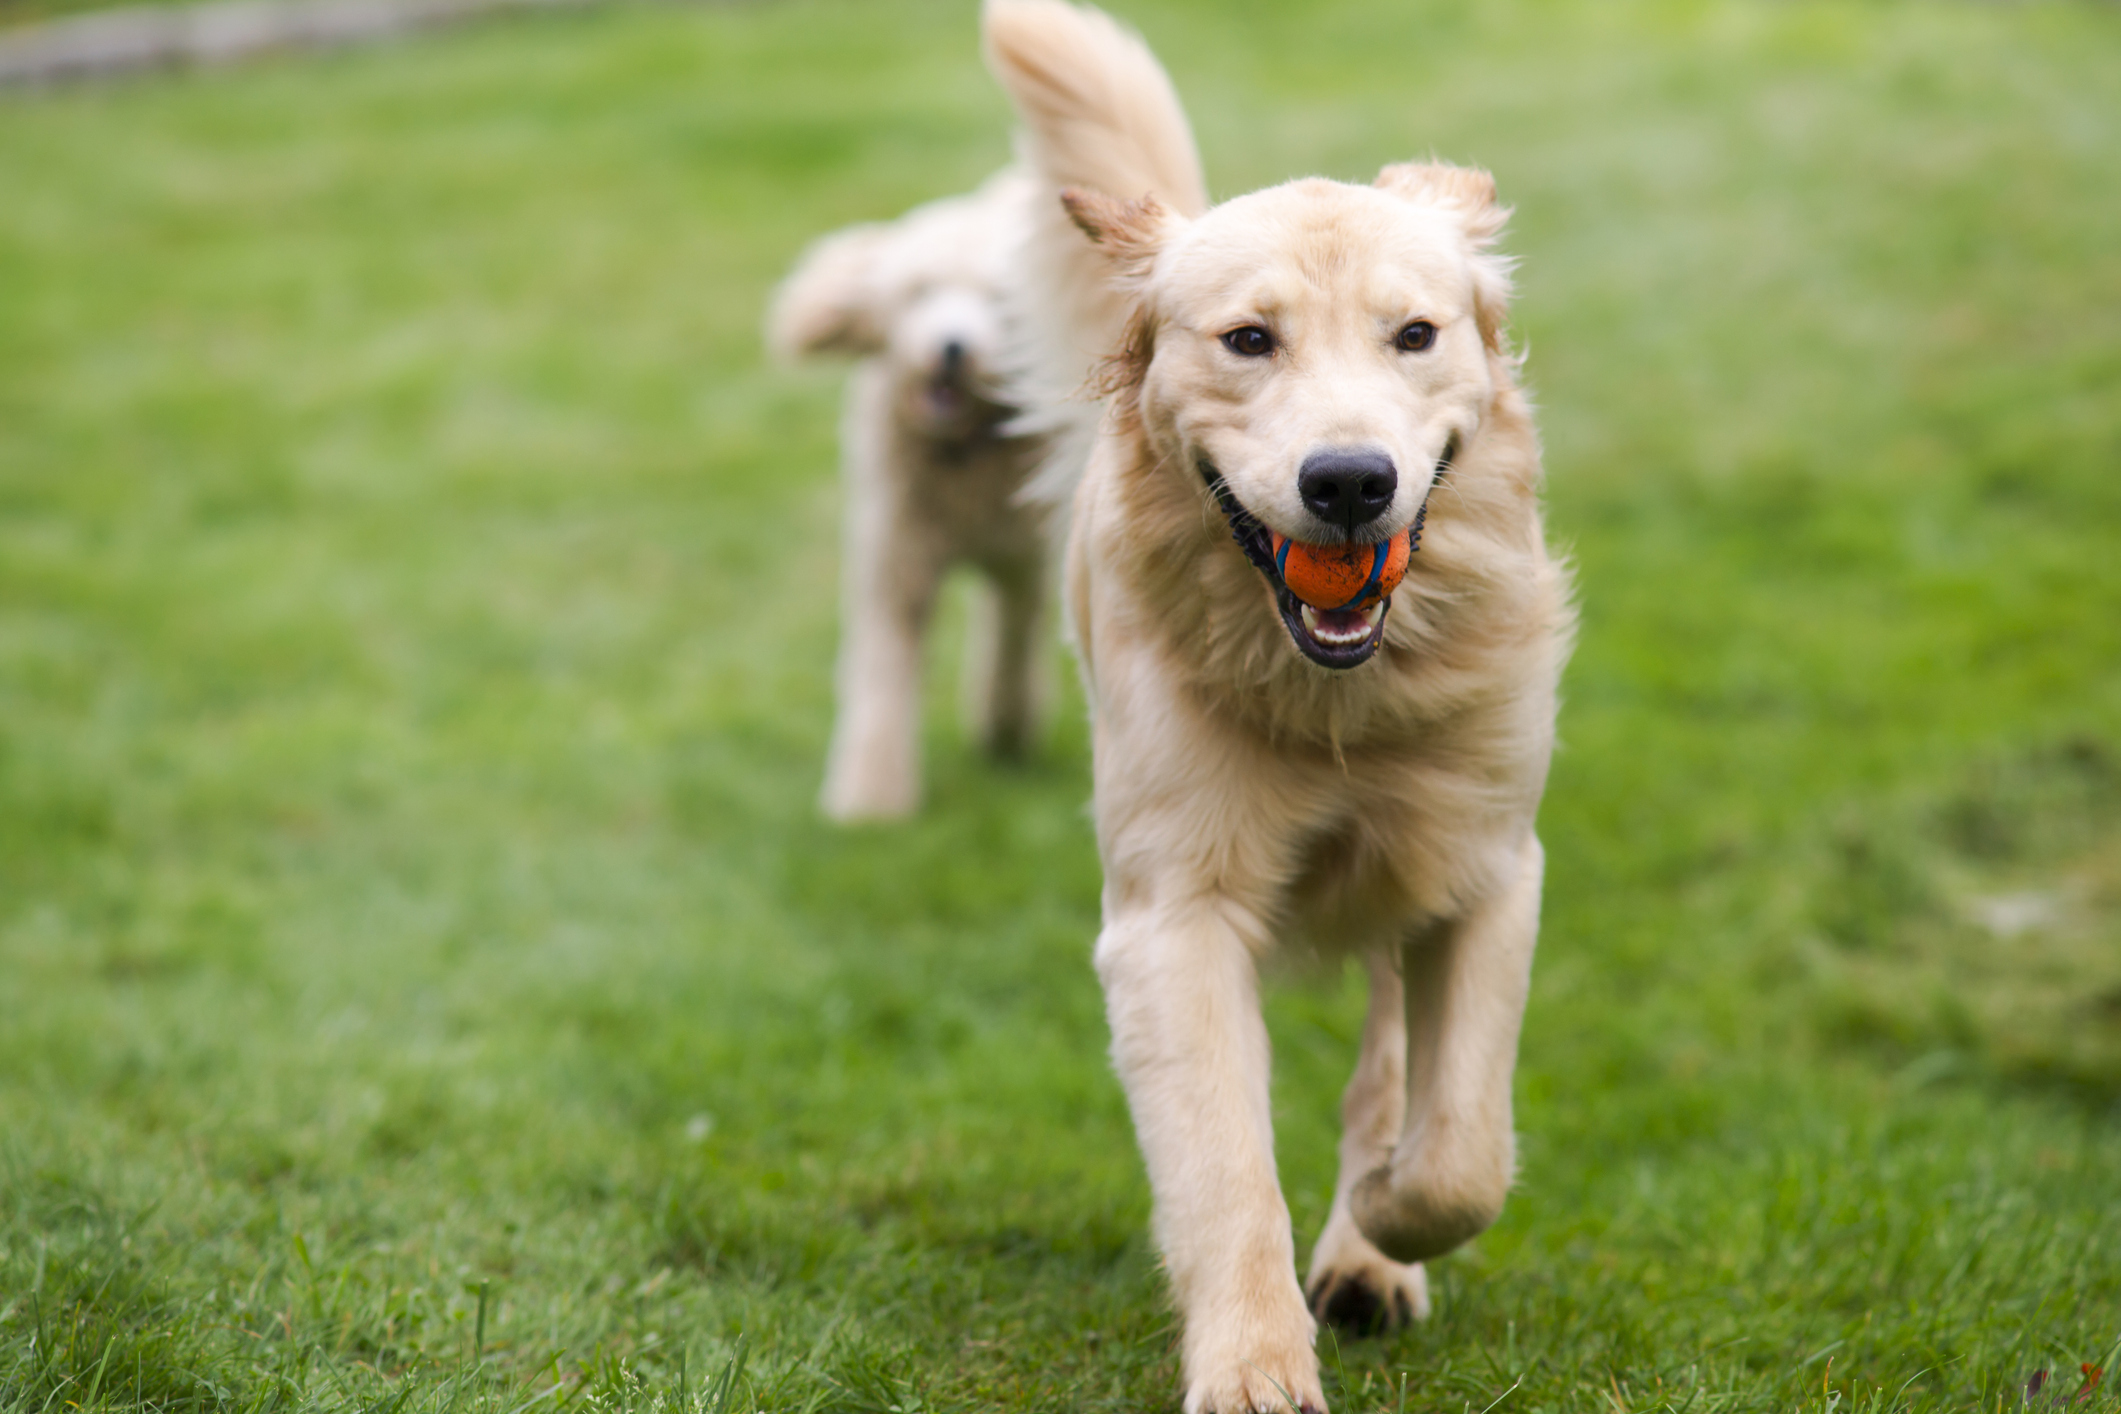 A golden retriever running with a ball in his mouth for the enhanced dog daycare blog.